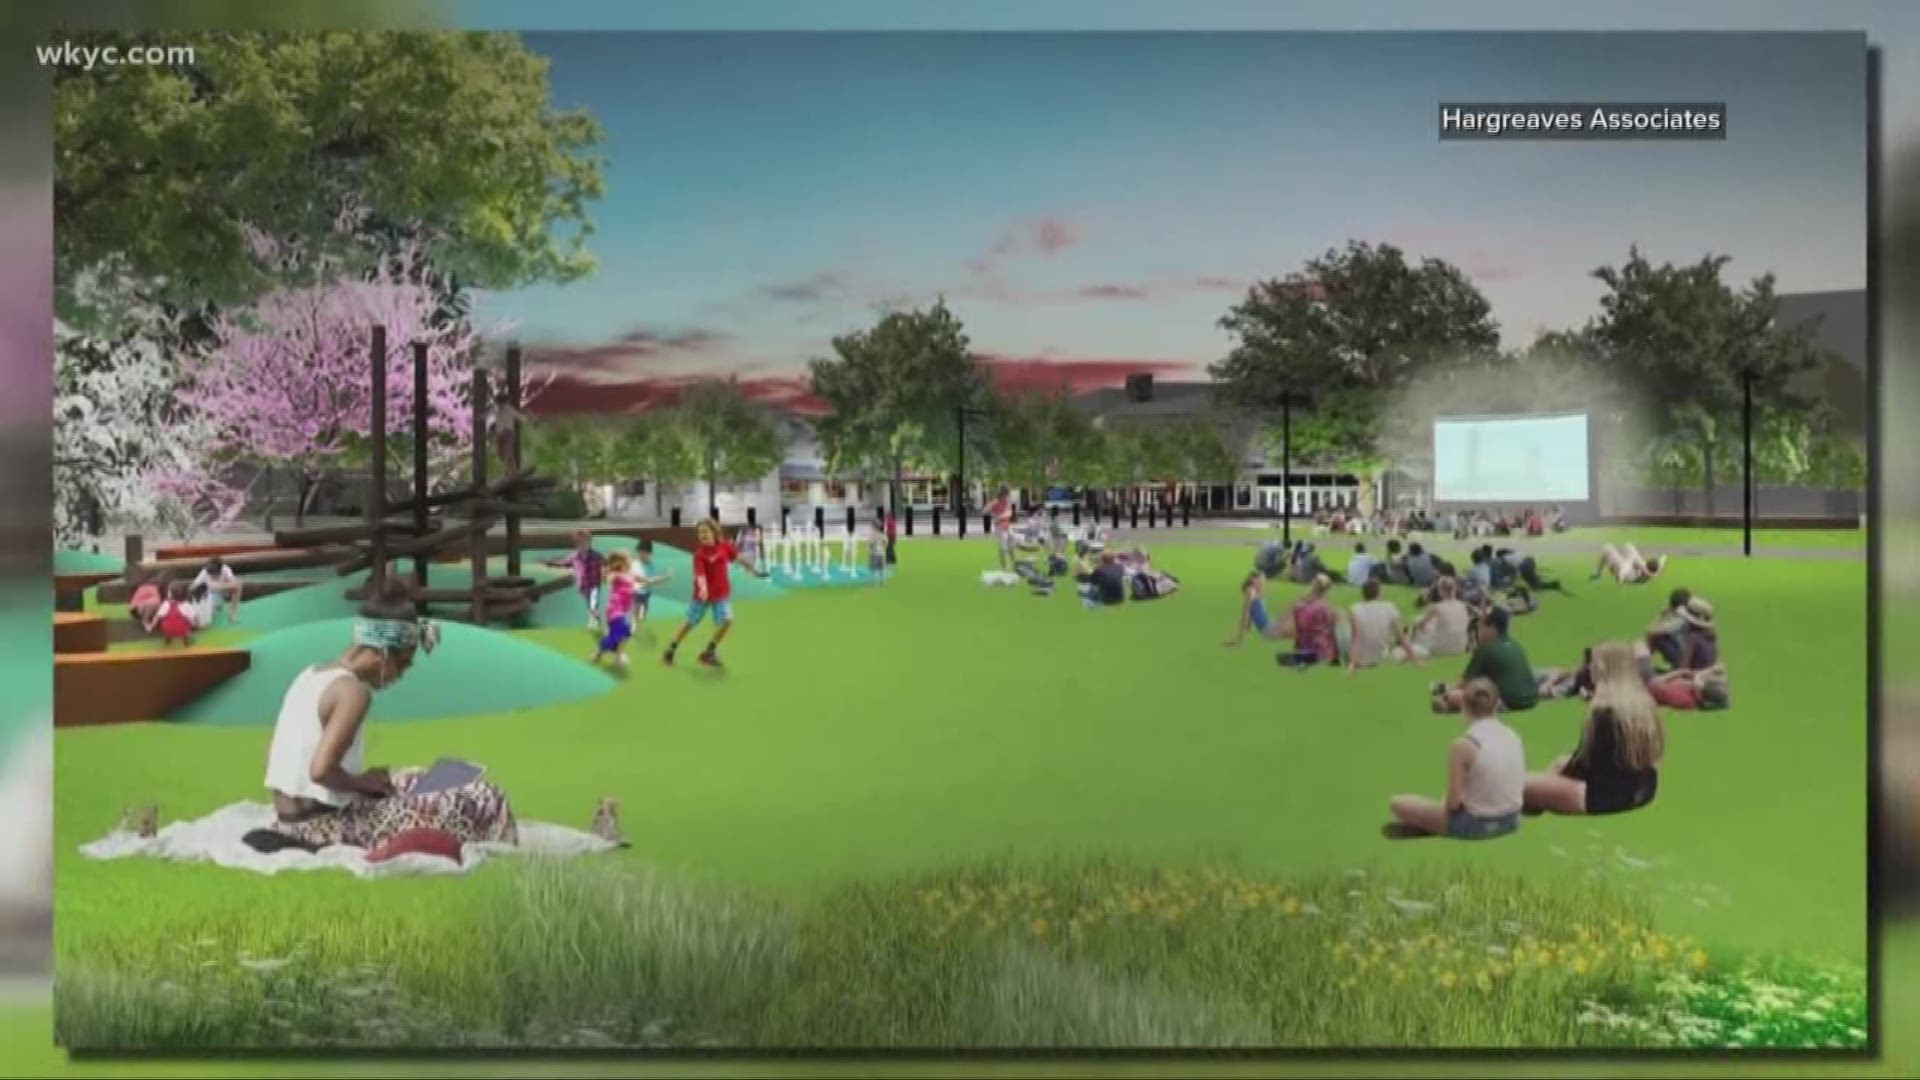 Designs for the new shaker square were revealed